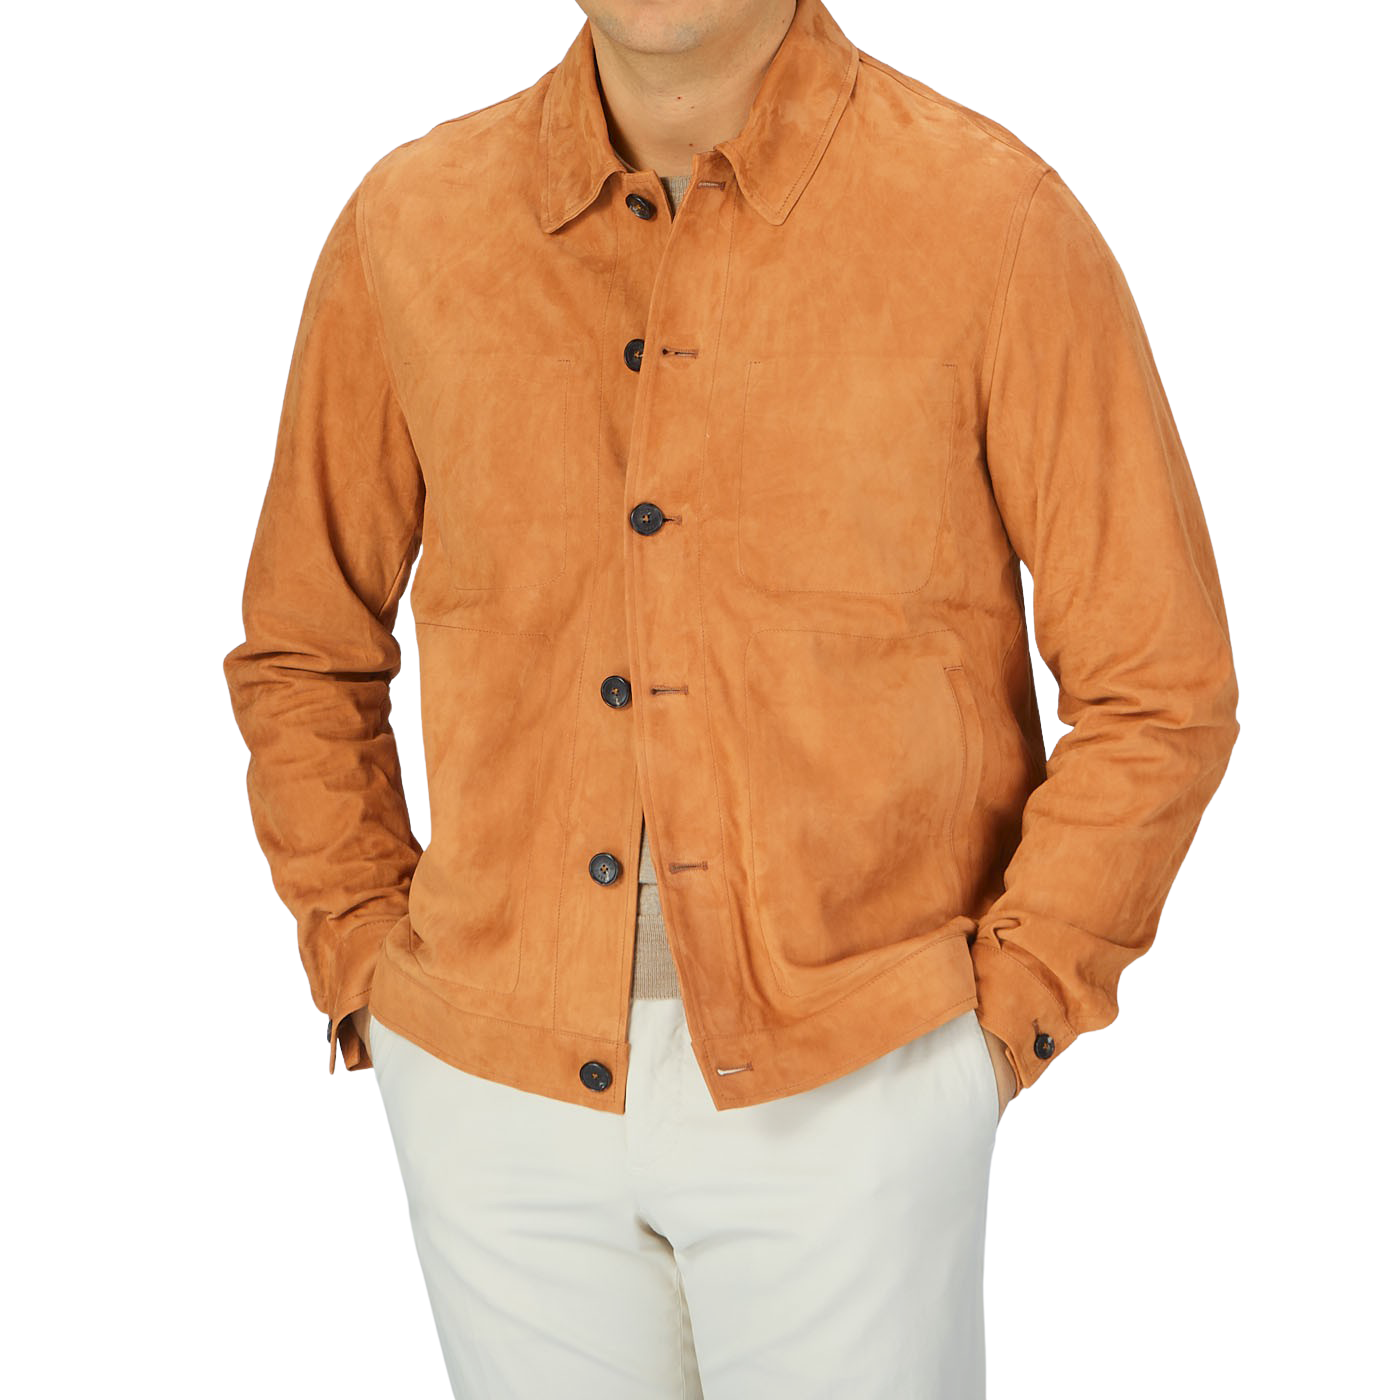 The man is wearing a Manto Bright Tan Suede Leather Overshirt.